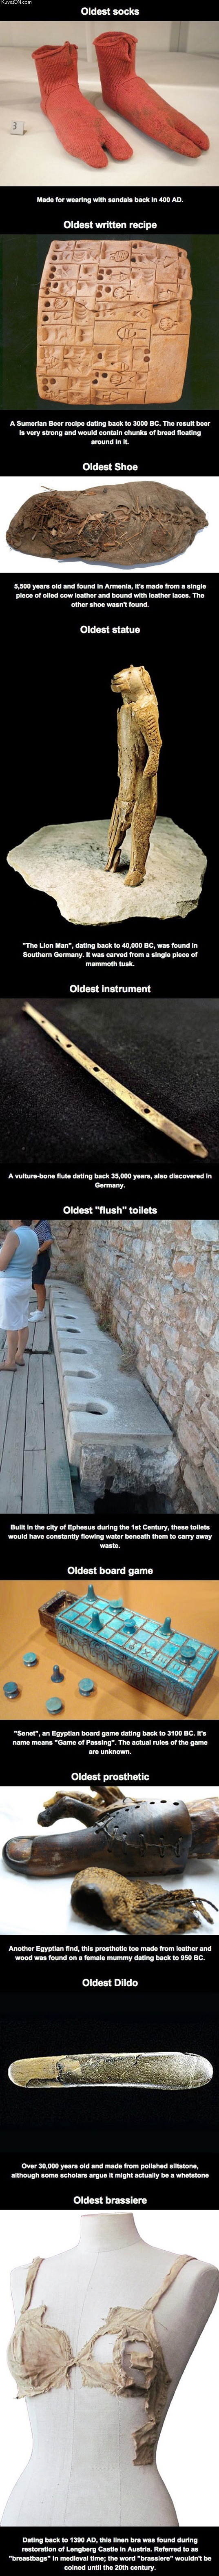 10_world_s_oldest_examples_of_ordinary_things.jpg